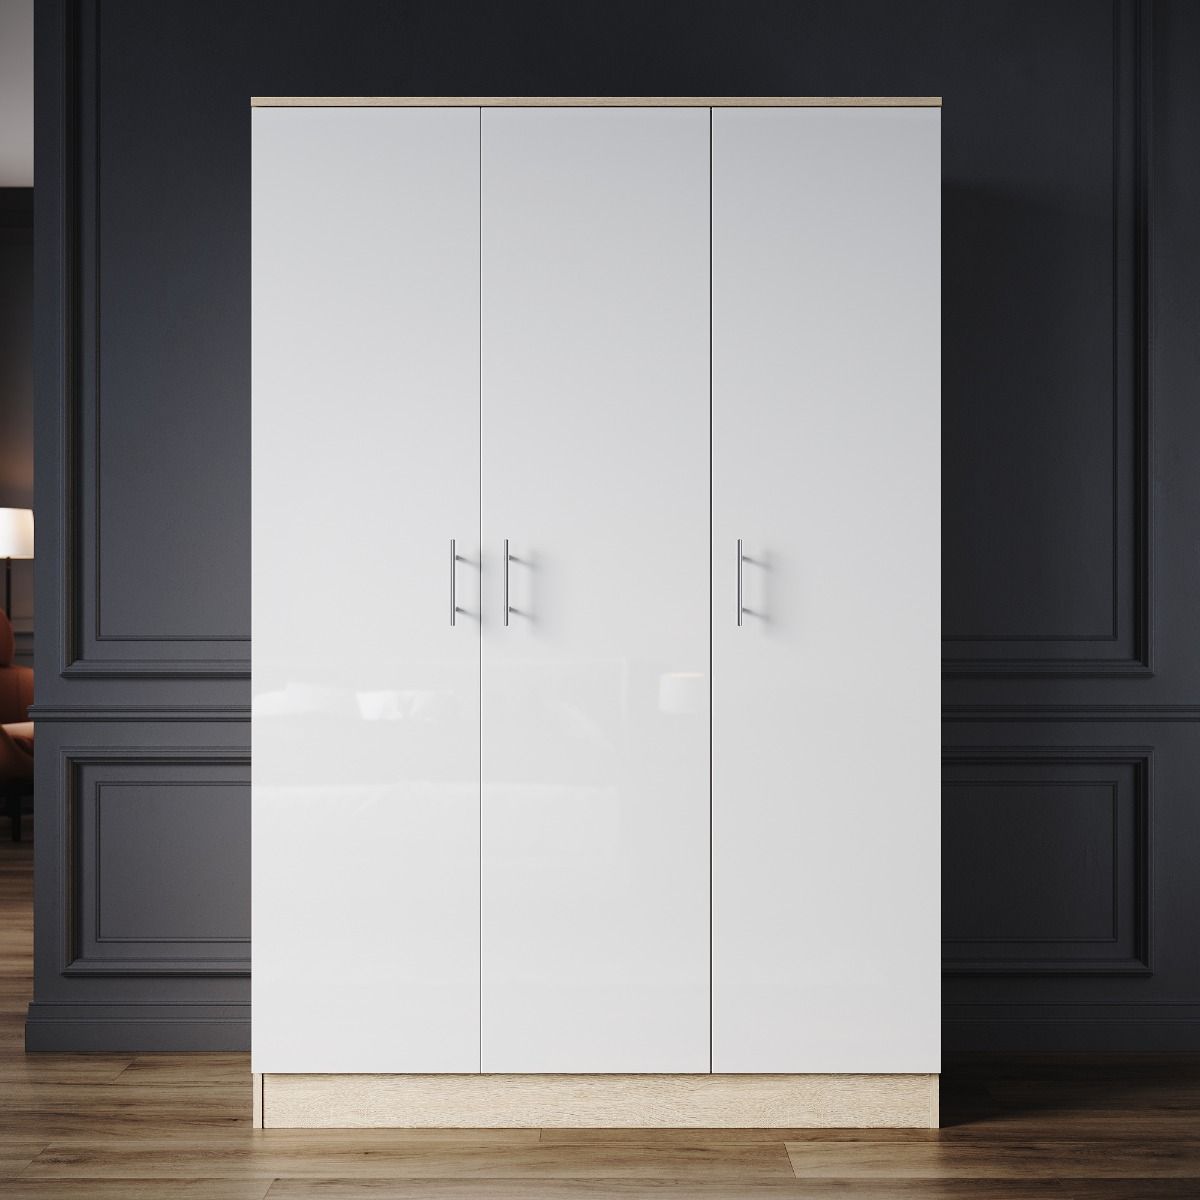 Elegant 3 Door Wardrobes High Gloss White Oak With Hanging Rail And Storage  Shelves Modern Clothes Cabinet Regarding White 3 Door Wardrobes (View 18 of 19)